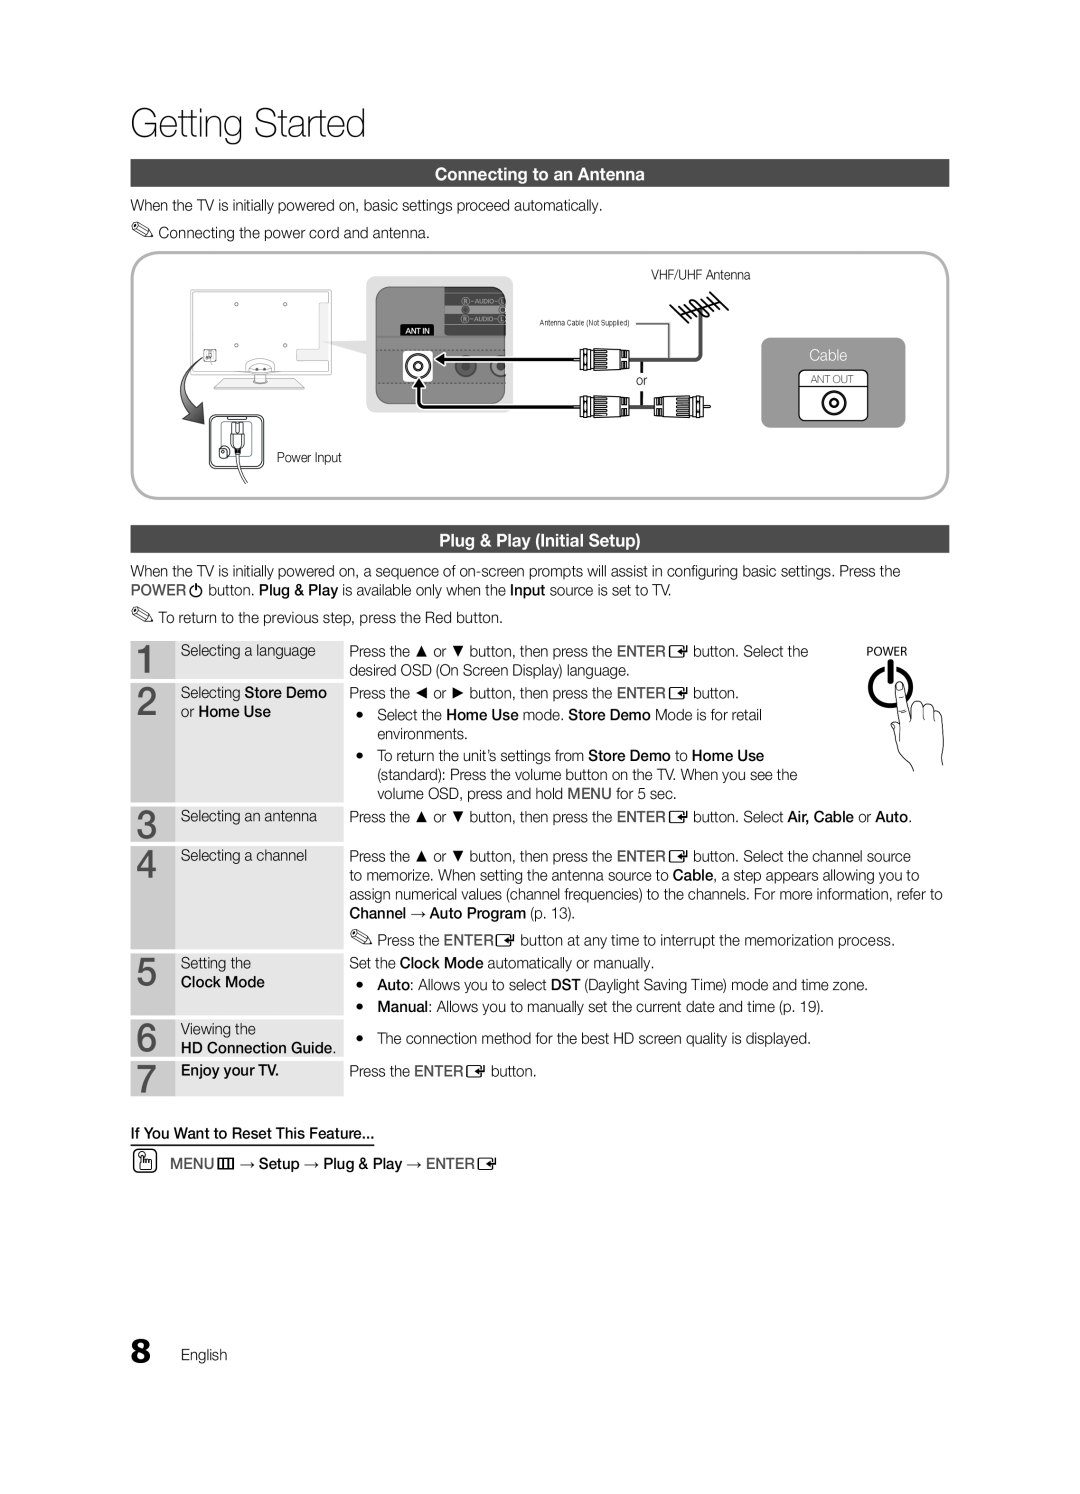 Samsung BN68-03004B-02, UC5000-ZC user manual Connecting to an Antenna, Plug & Play Initial Setup, Cable, Getting Started 